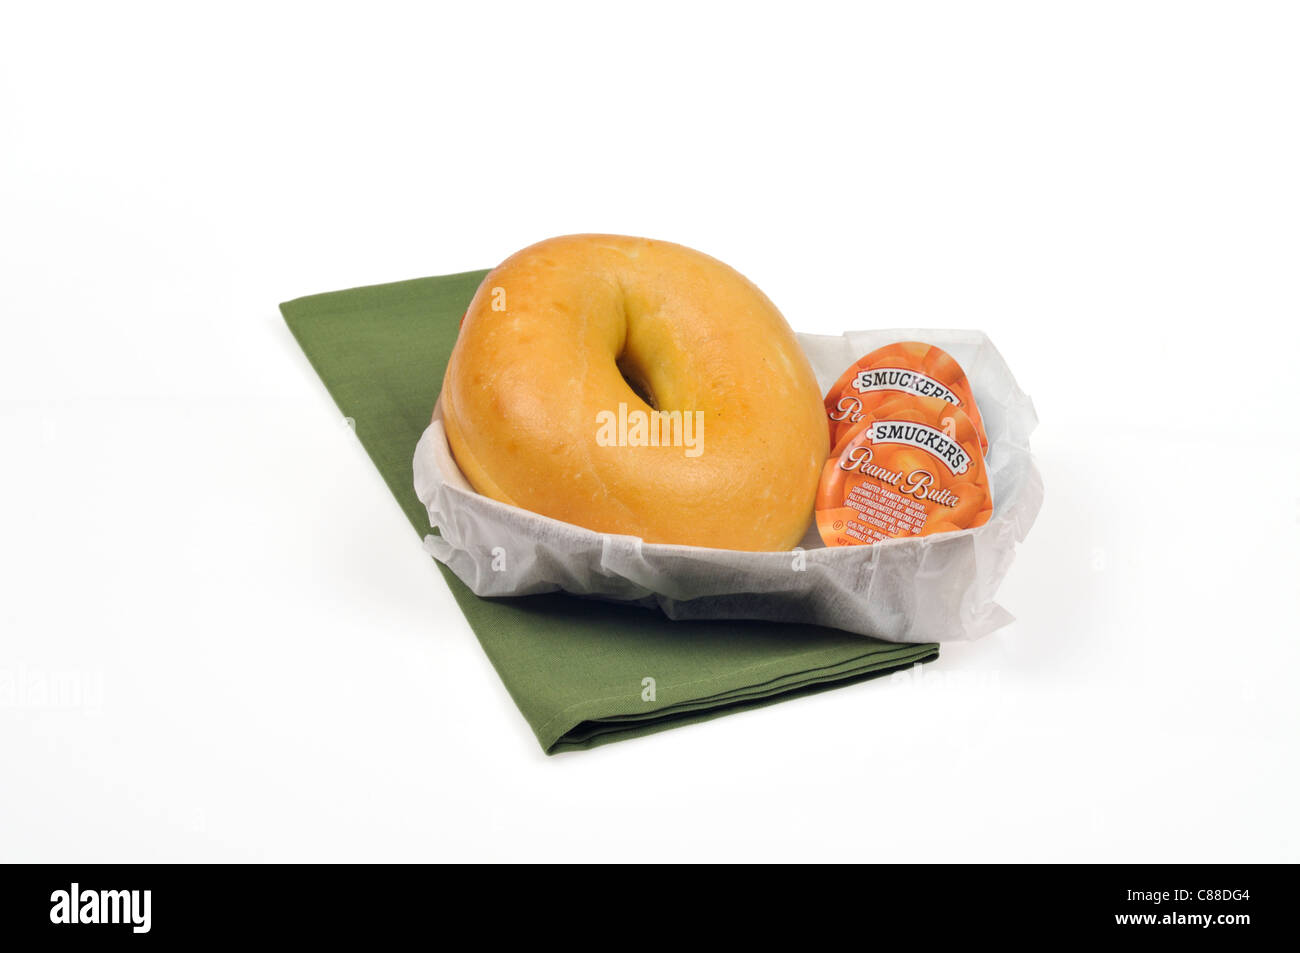 Plain bagel with 2 smuckers peanut butter containers  in a paper basket  with green napkin on white background, cutout. Stock Photo